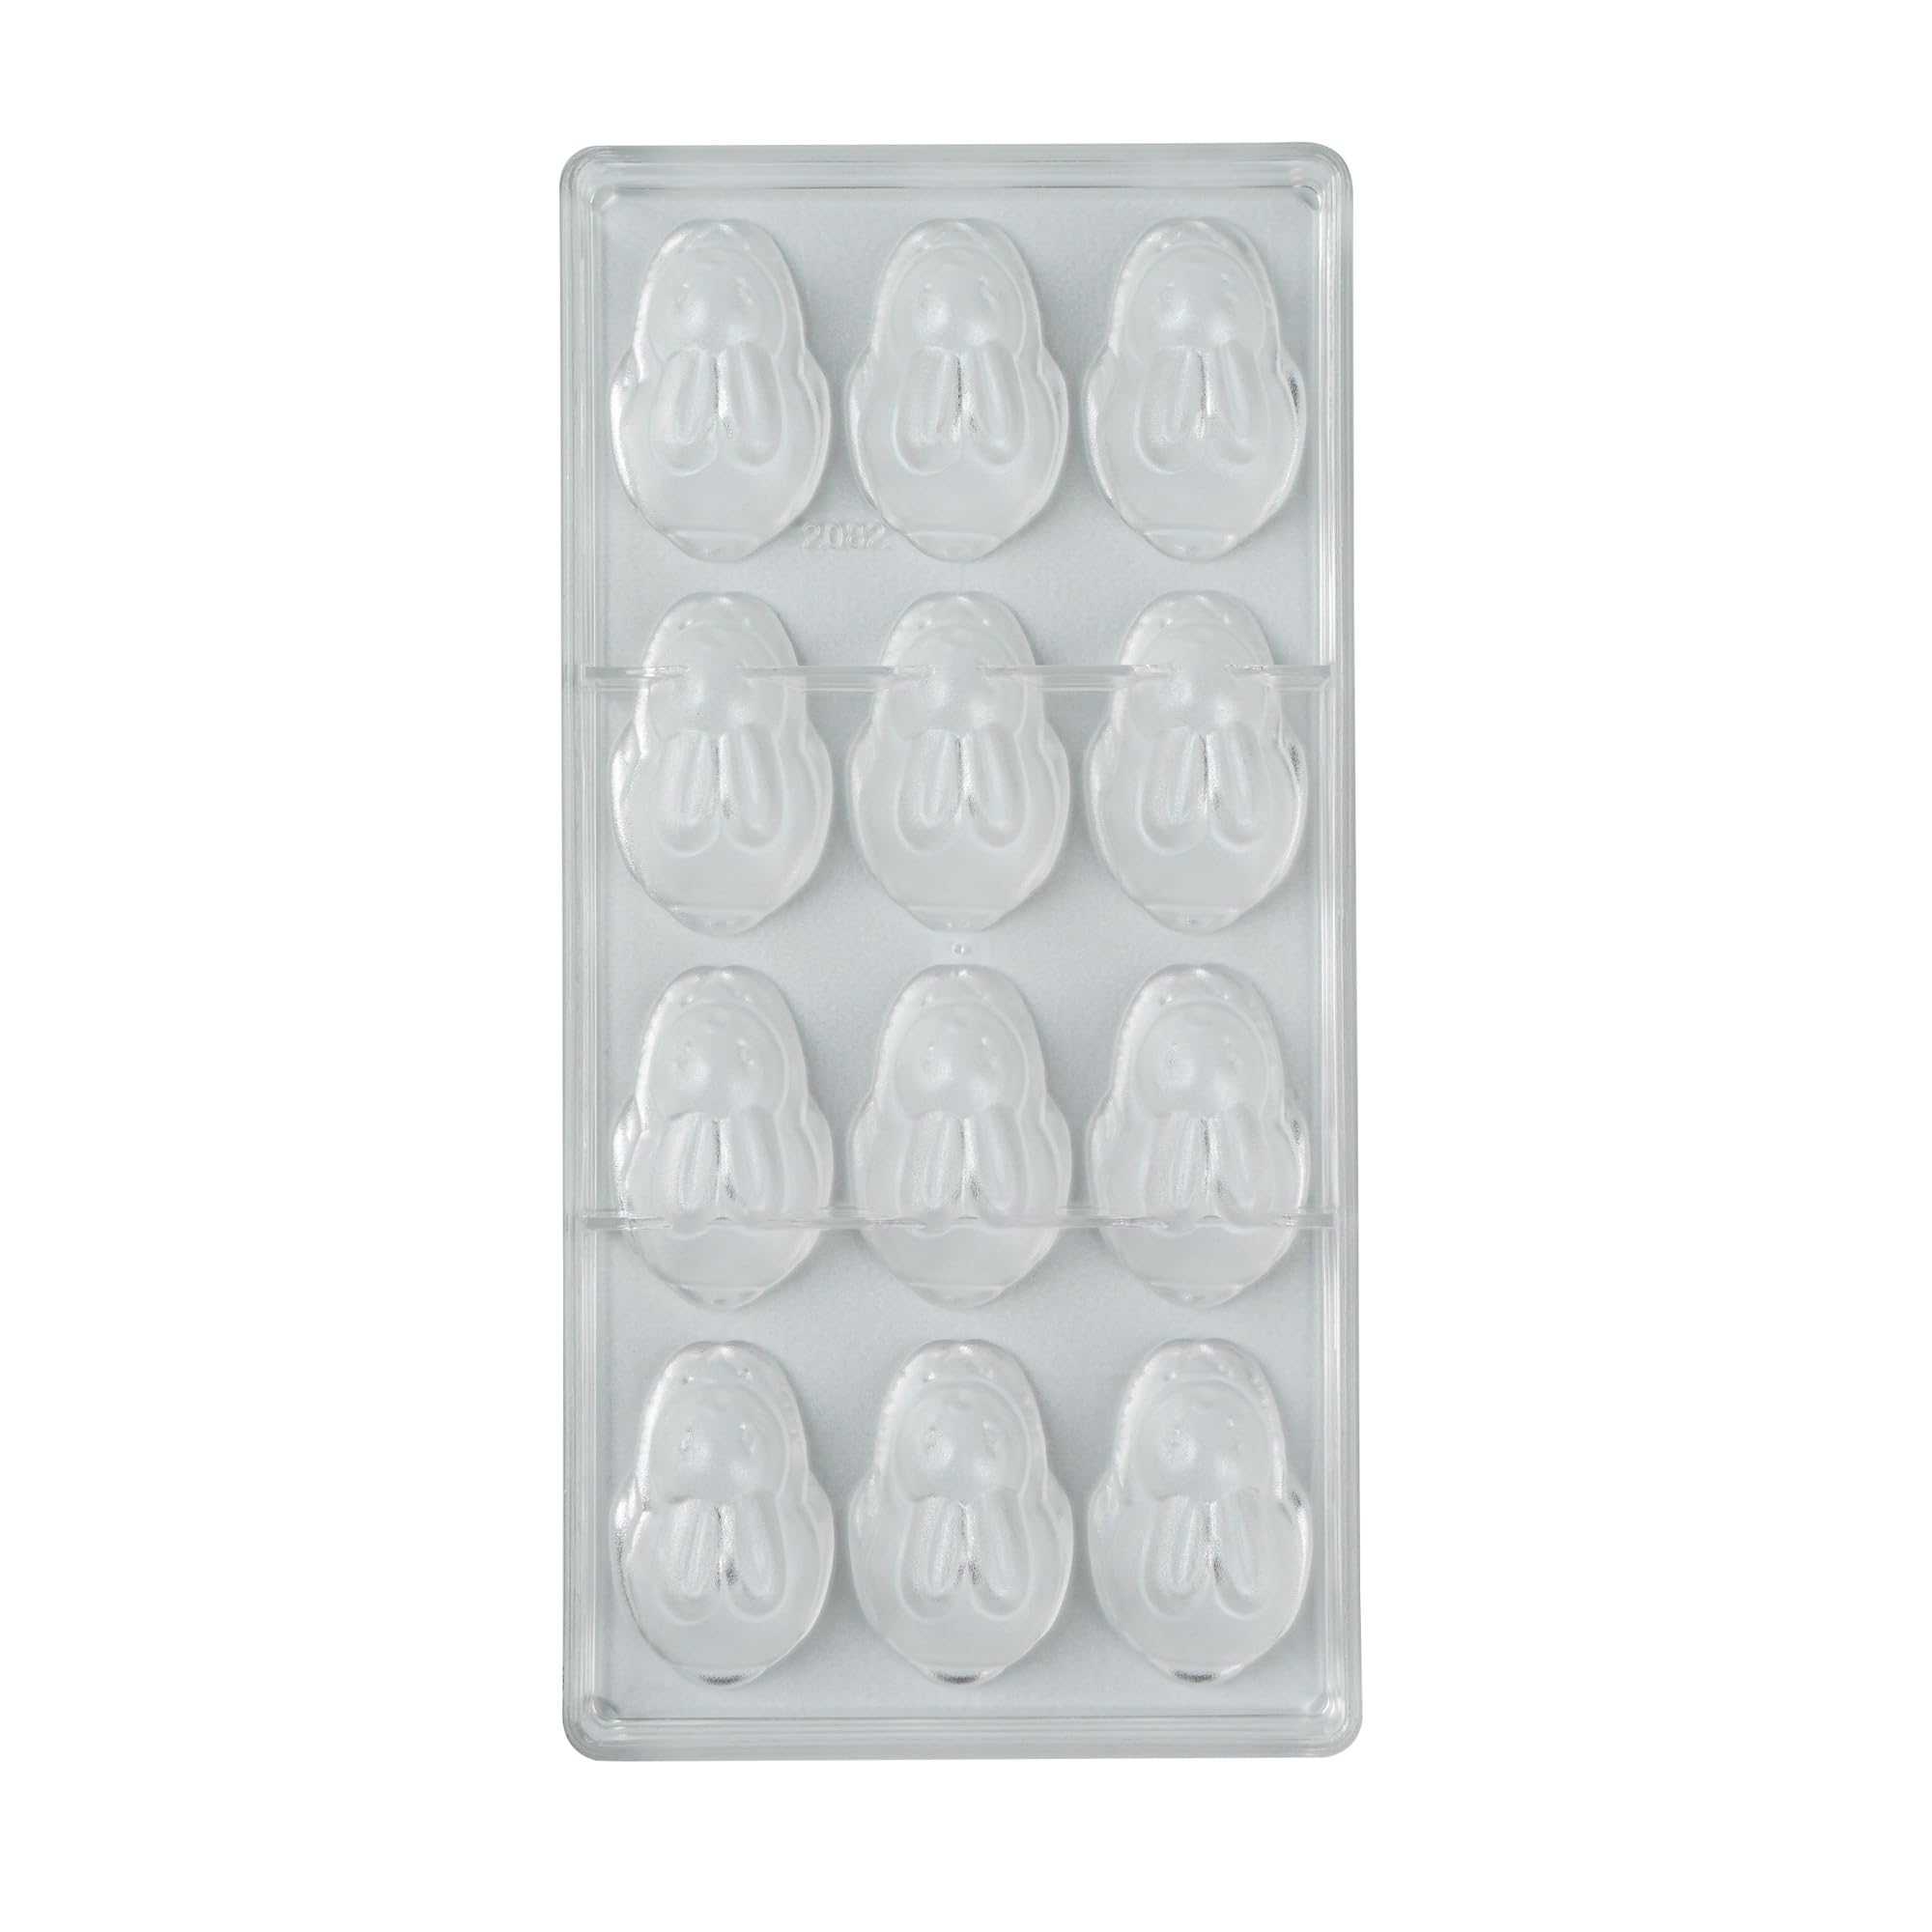 Pastry Tek 10.8 x 5.3 Inch Chocolate Shaping Mold, 1 Freezable Bunny Shaped Candy Mold - 12 Cavities, Dishwashable, Clear Polycarbonate Chocolate Mold, Easy To Release - Restaurantware